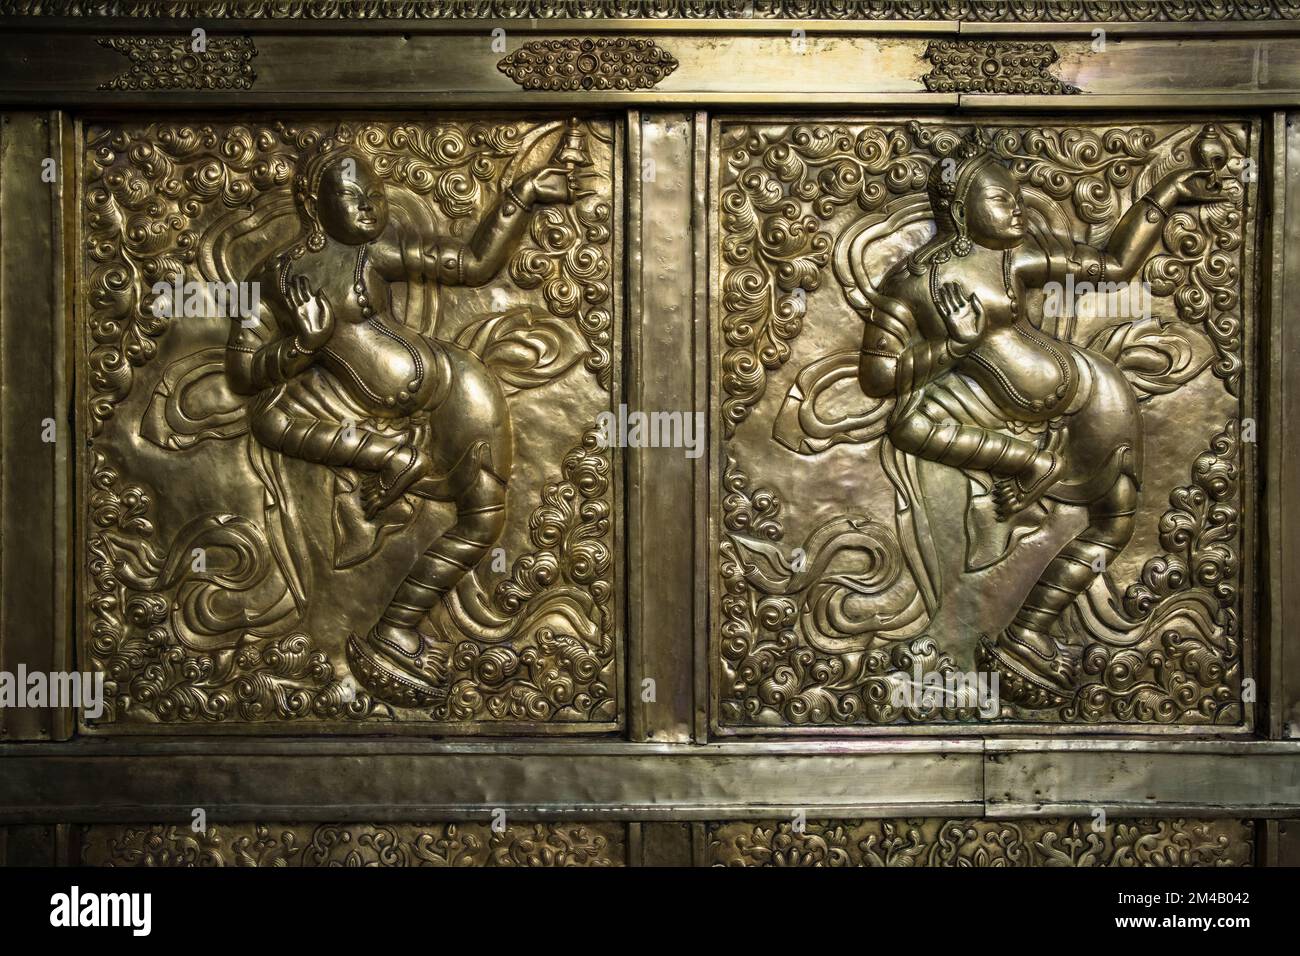 Large embossed gilt copper plaque with figures of dancers inside the Jokhang temple, in Lhasa. Tibet Autonomous Region. China. Stock Photo